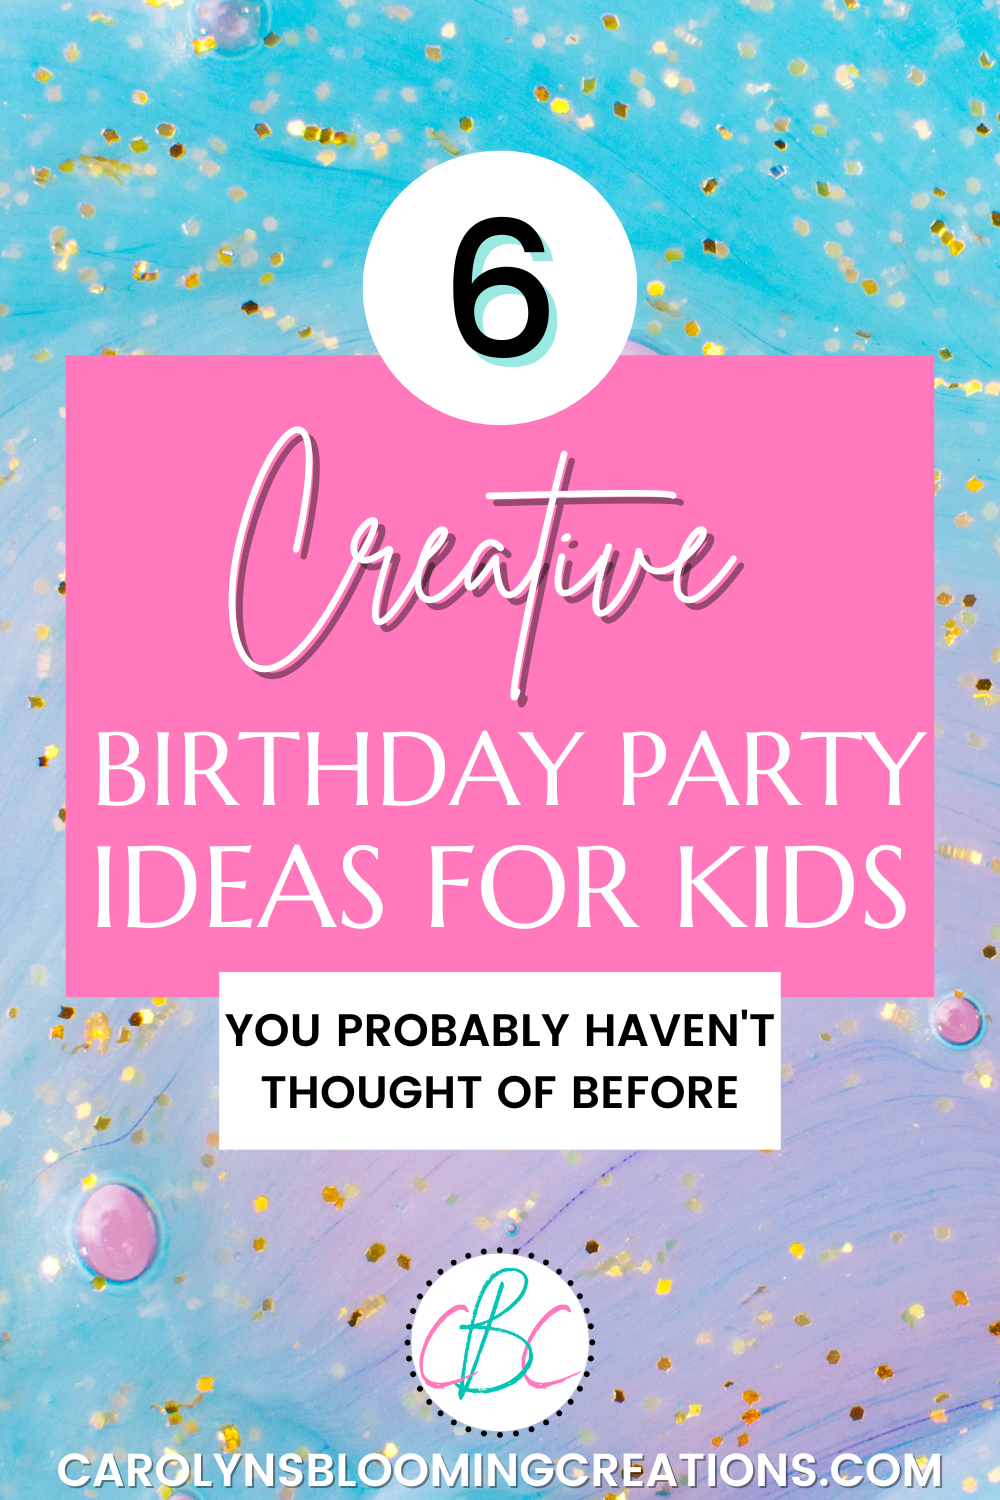 6 Creative Birthday Party Ideas For Kids — DIY Home Improvements Carolyn's Blooming Creations